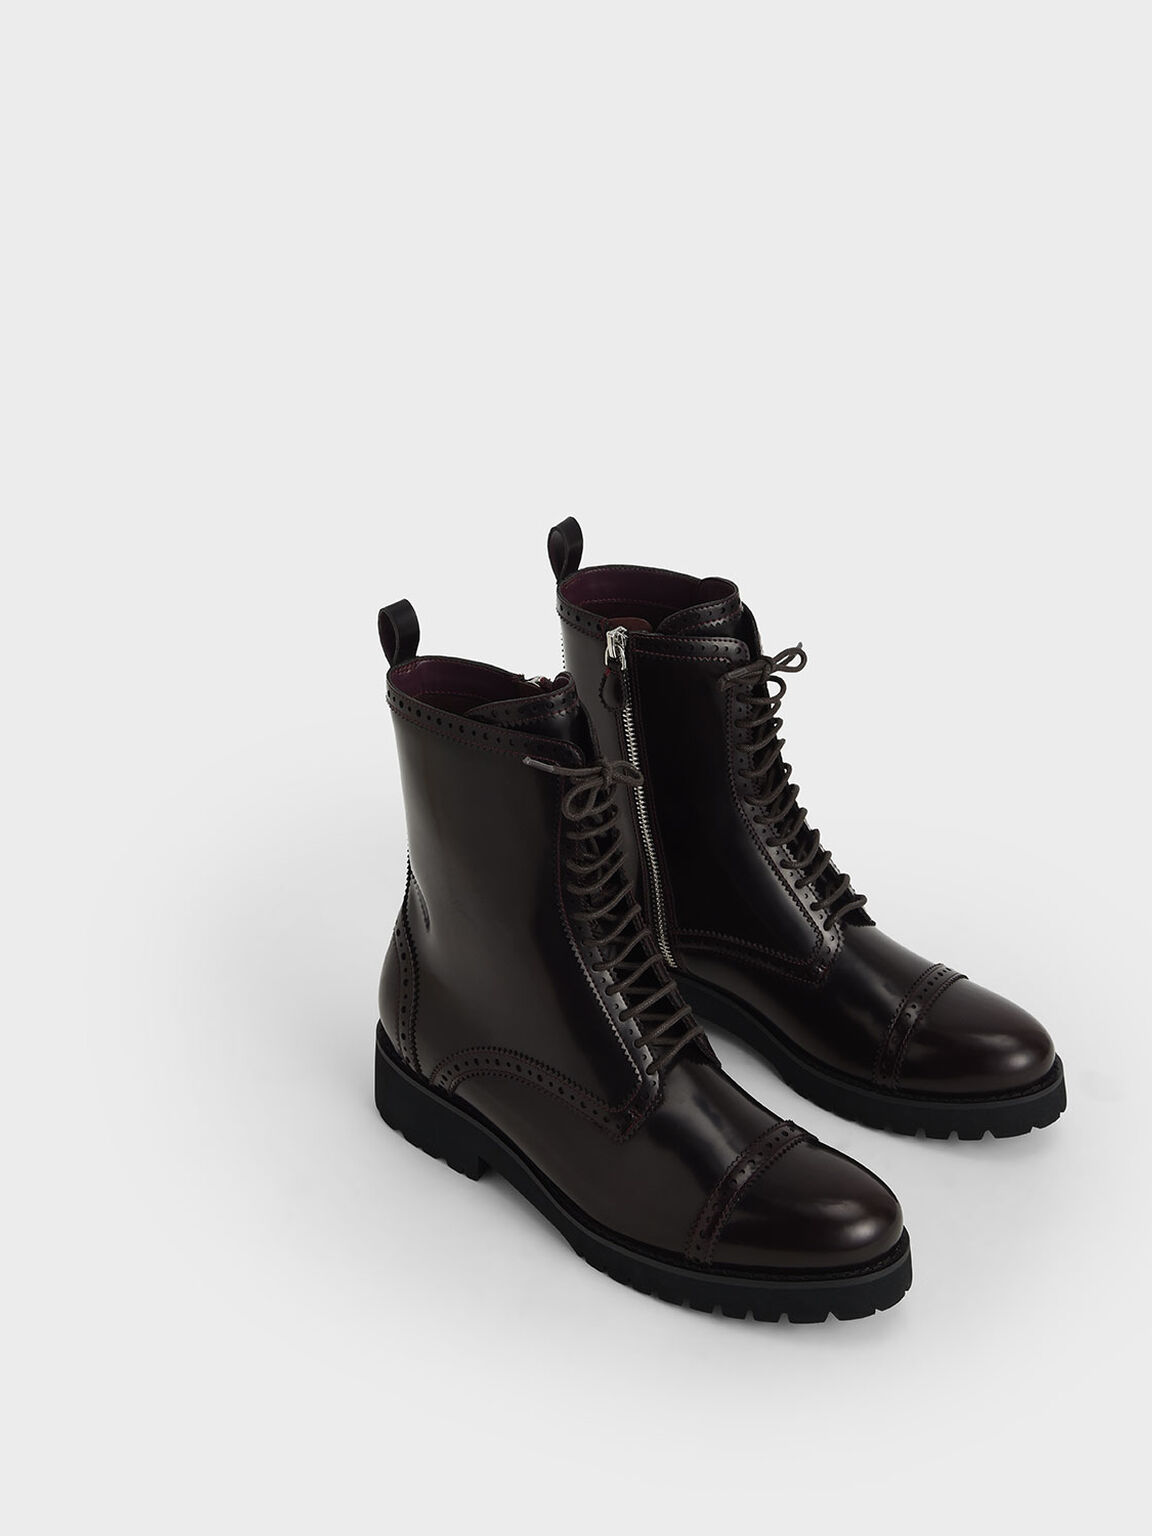 Brogue Ankle Boots, Burgundy, hi-res